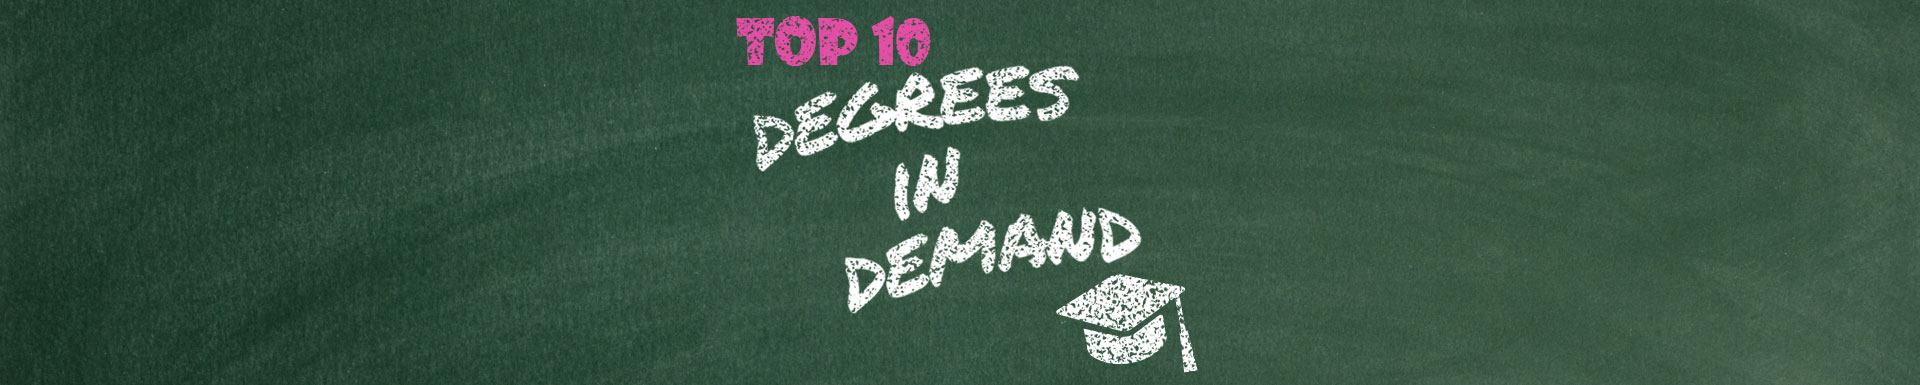 10 Most In Demand Degrees in 2021 | Higher Education News